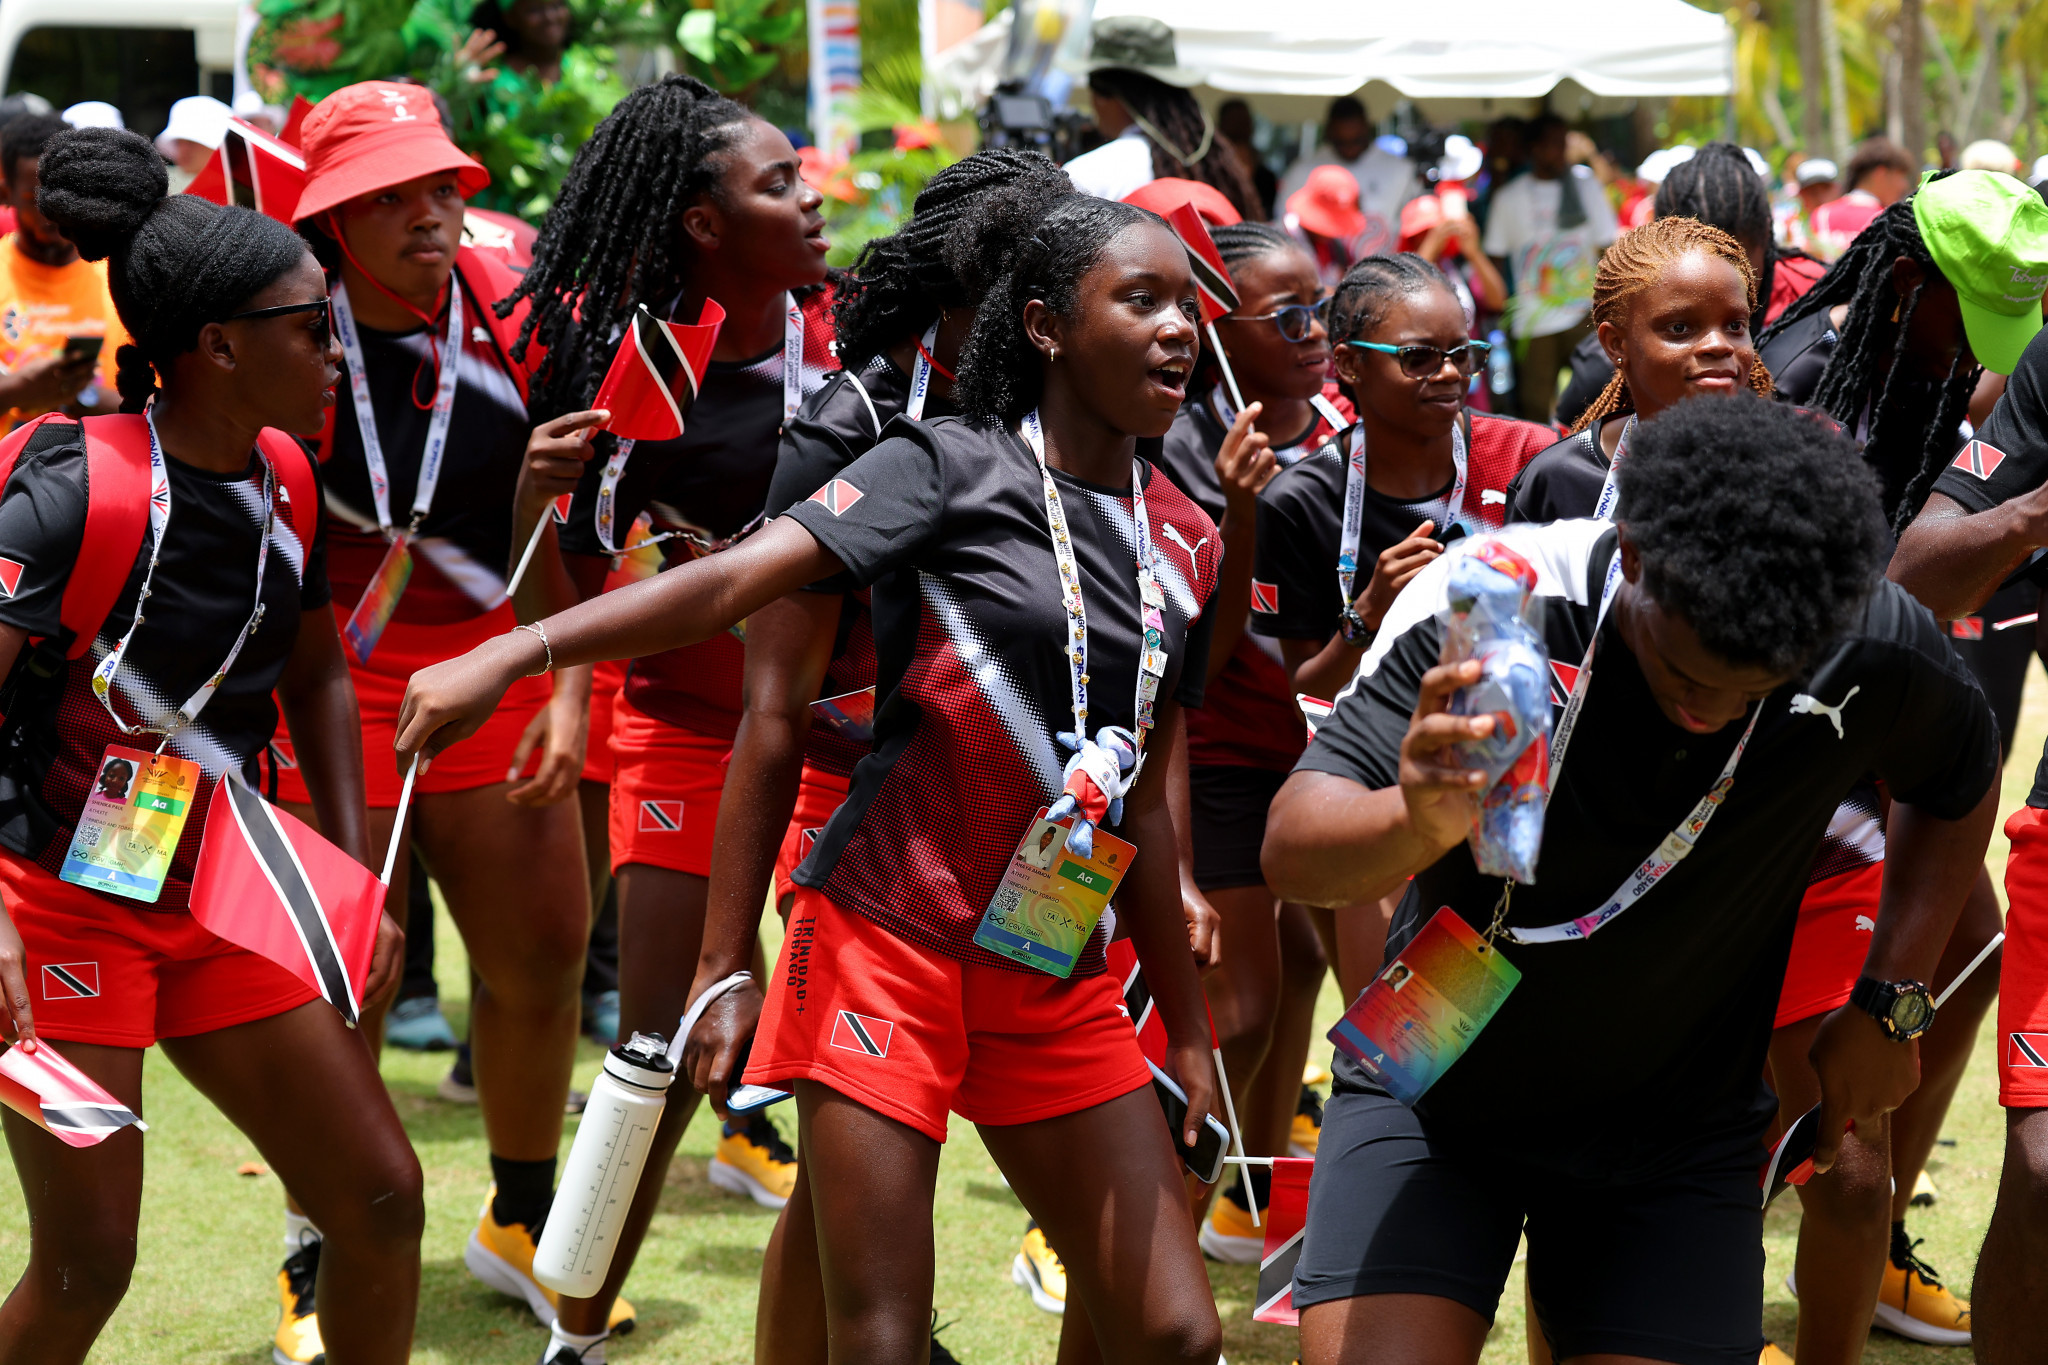 Trinidad and Tobago has been praised for having "achieved everything" by Dame Louise Martin at the Commonwealth Youth Games ©Getty Images (Image obtained at insidethegames.biz)